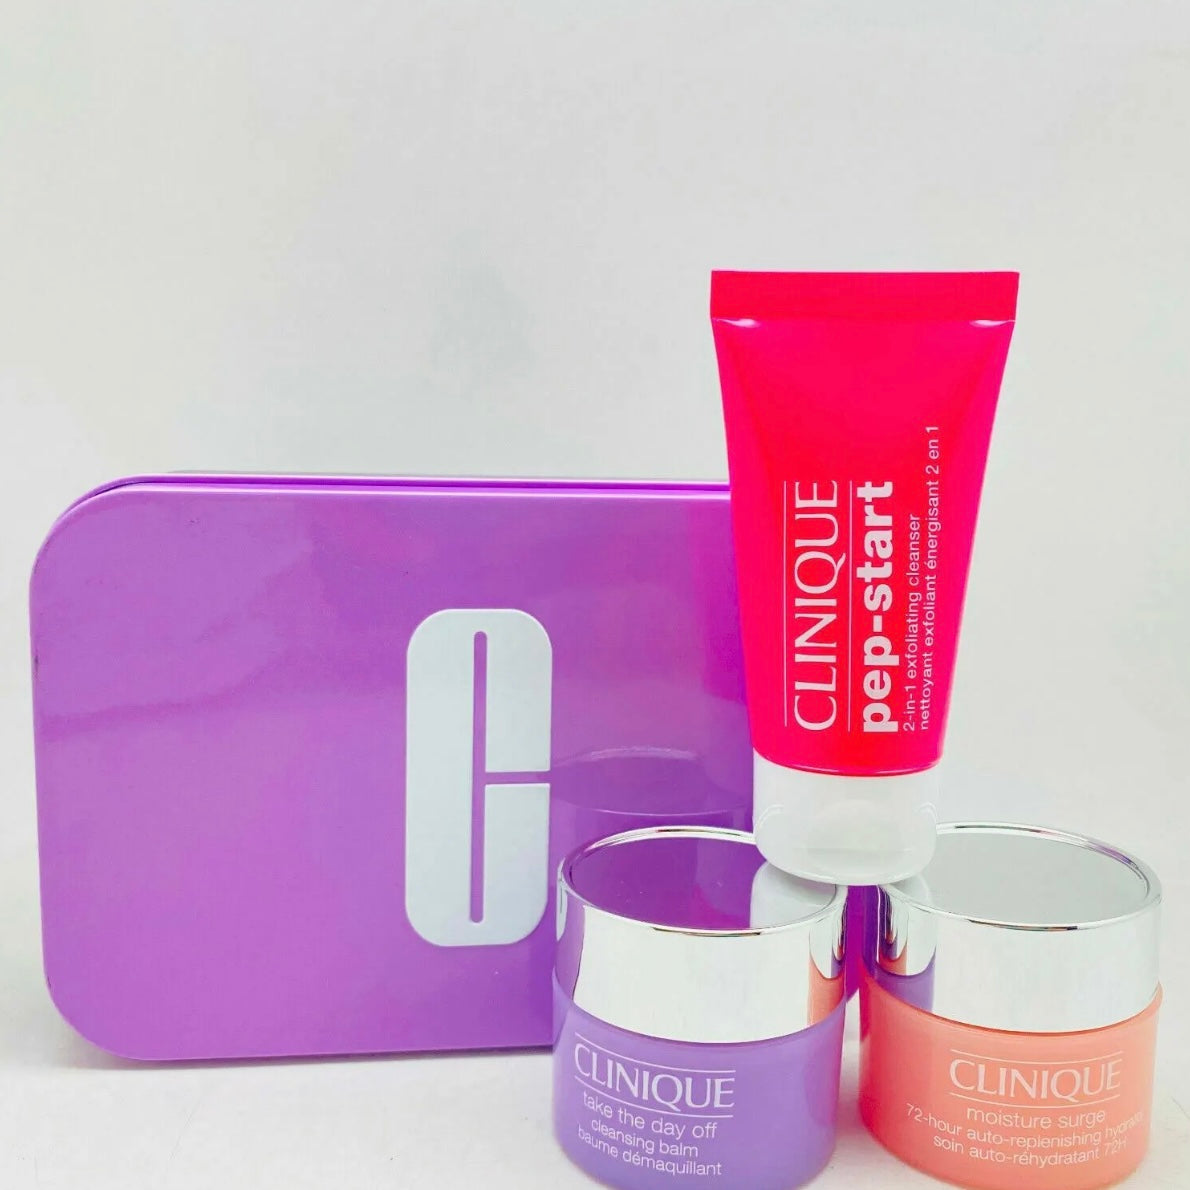 New Clinique Limited Esition Fresh-Faced Glow 4 Piece Set